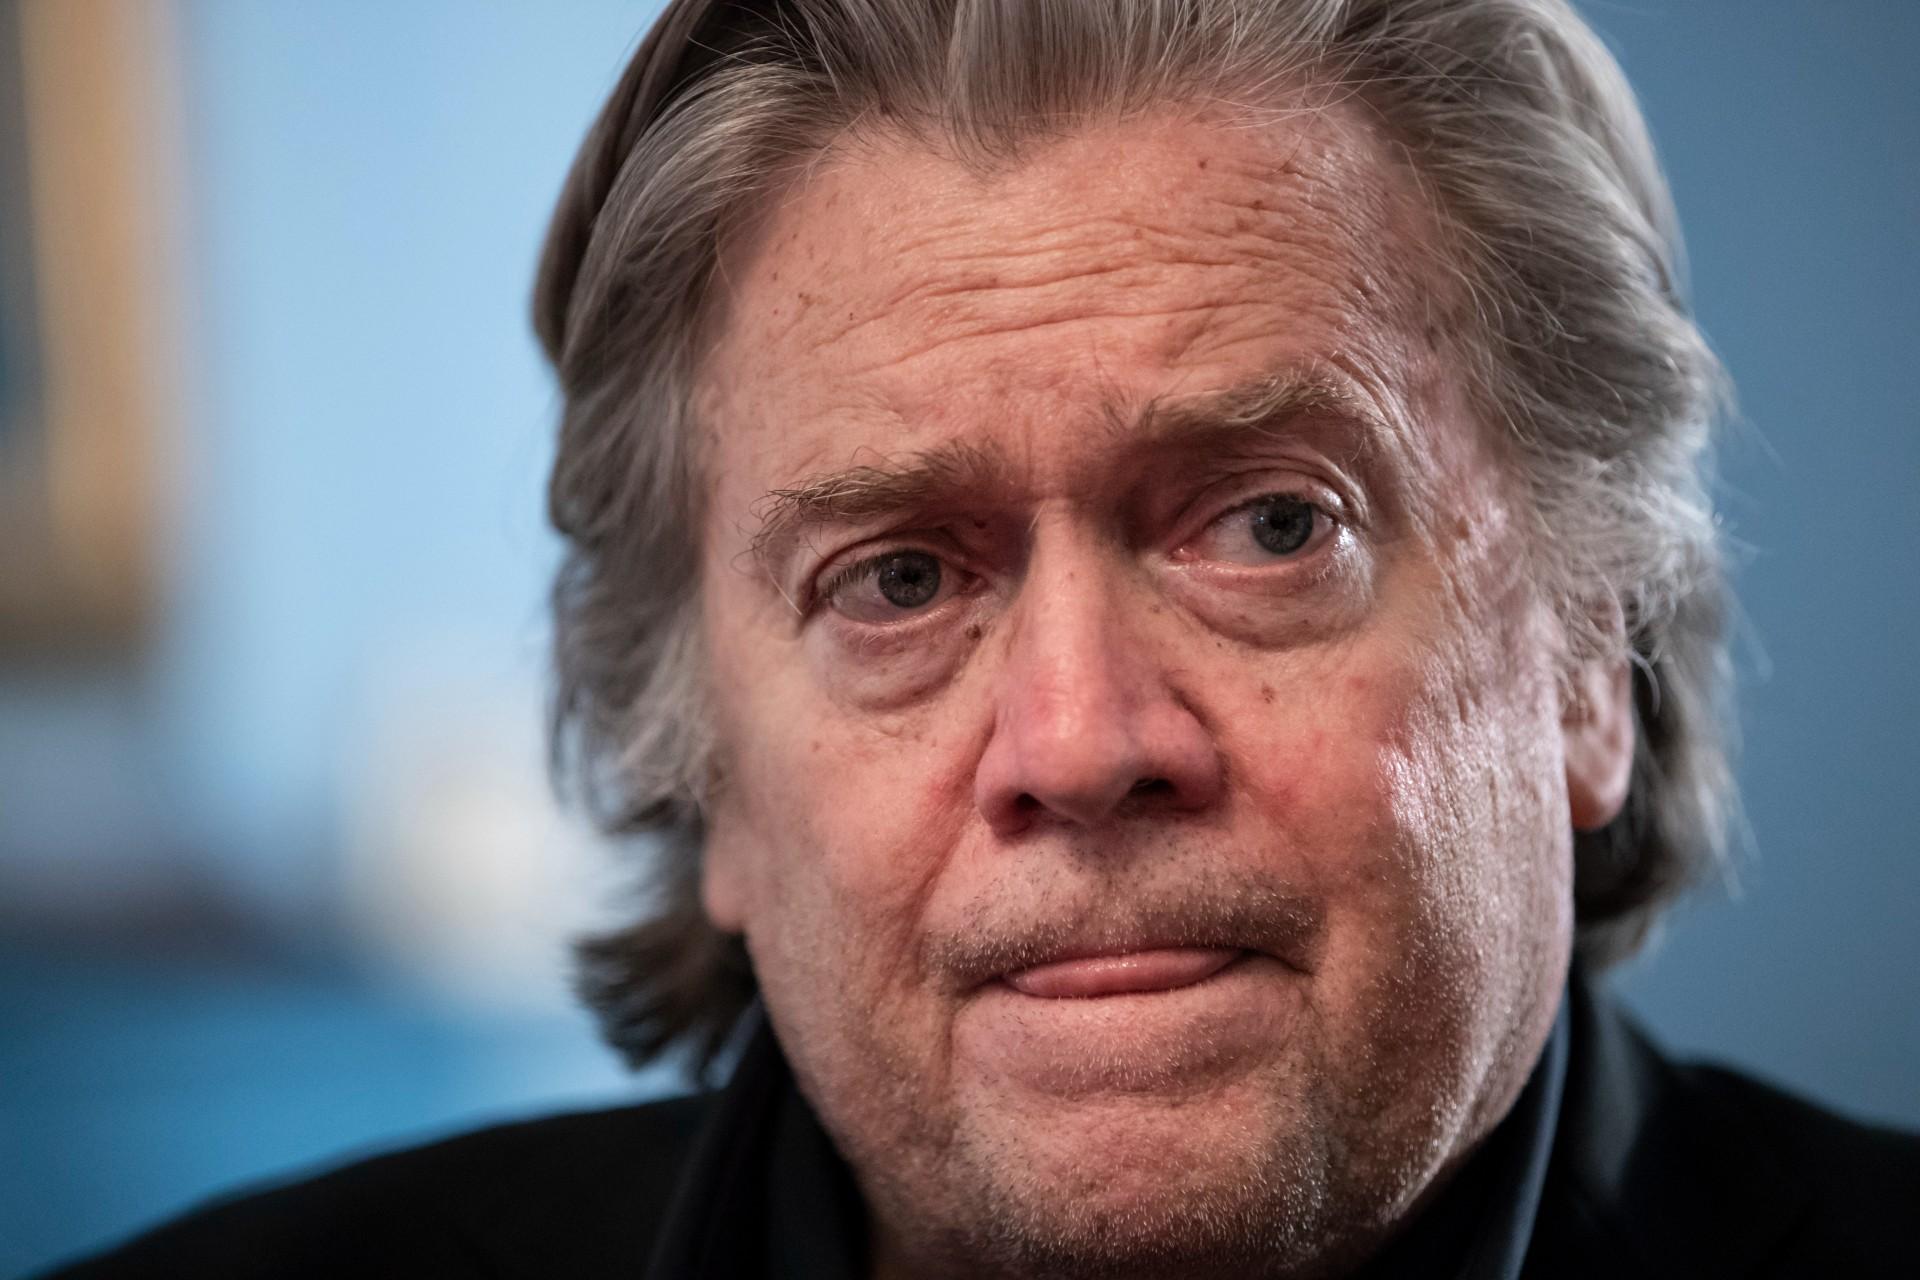 In this file photo from Sunday, Aug. 19, 2018, Steve Bannon, President Donald Trump's former chief strategist, talks about the approaching midterm election during an interview with The Associated Press, in Washington. (AP Photo / J. Scott Applewhite, file)